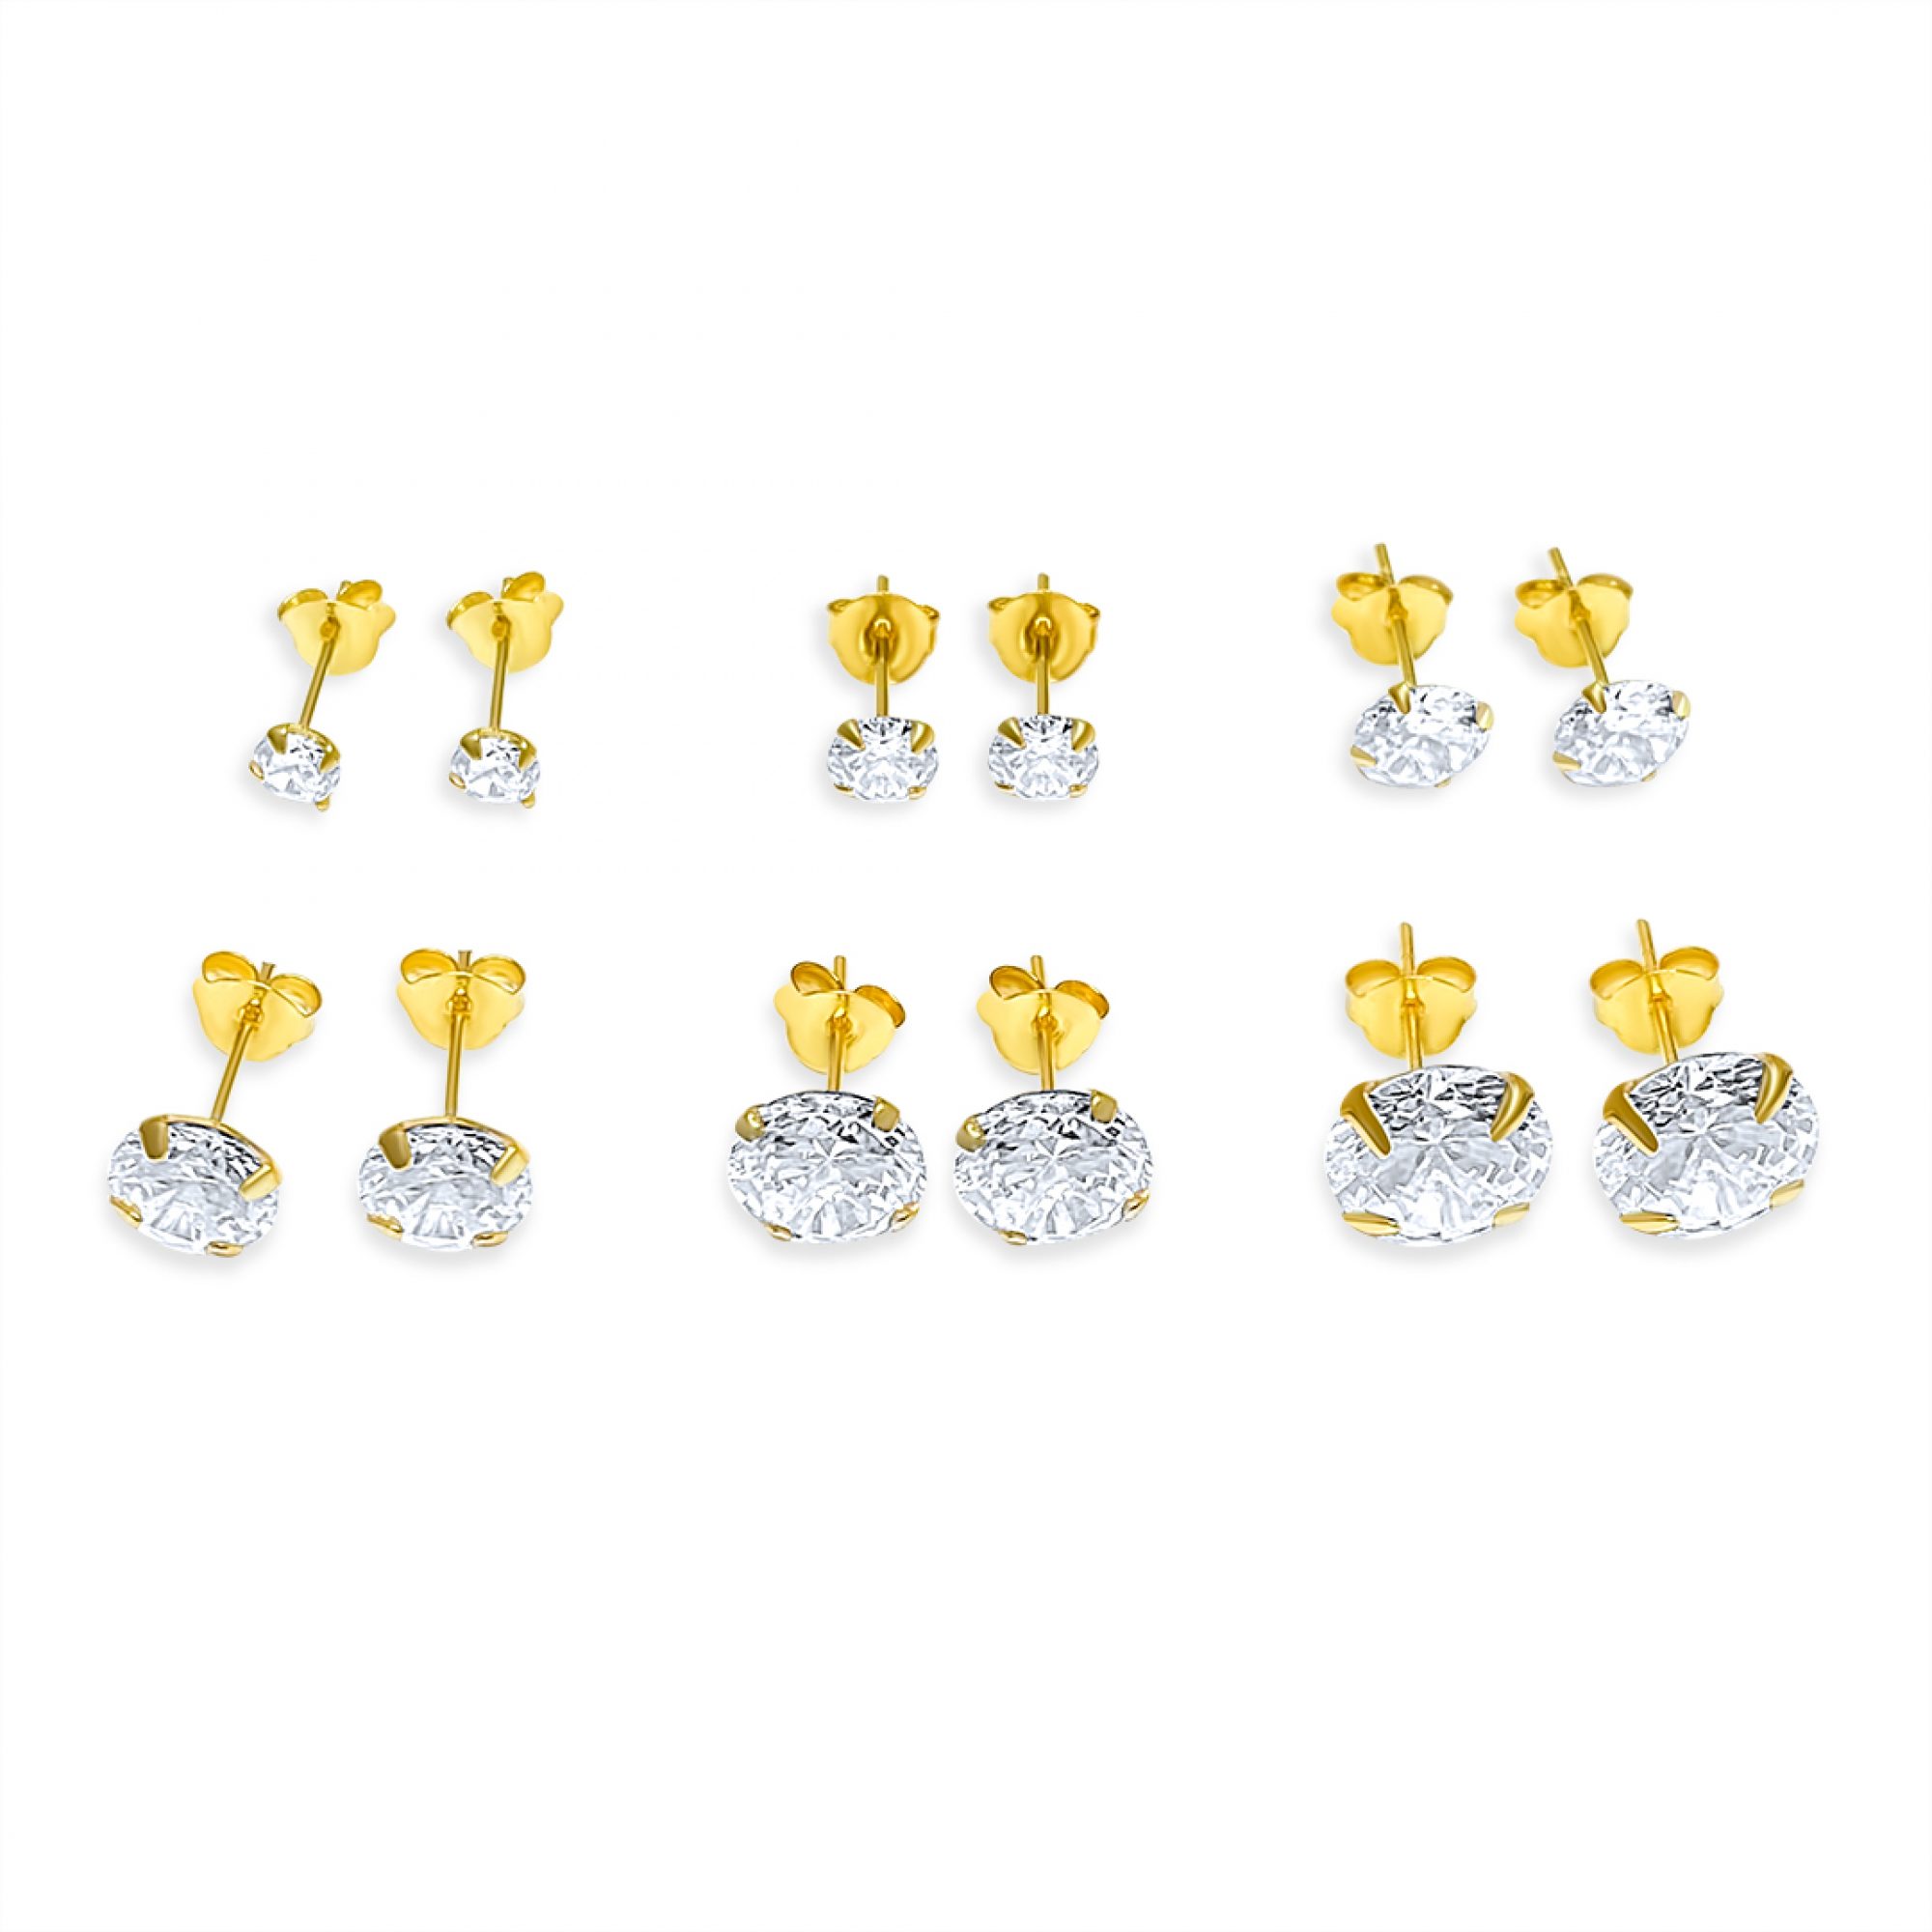 Gold plated stud earrings with zircon stones